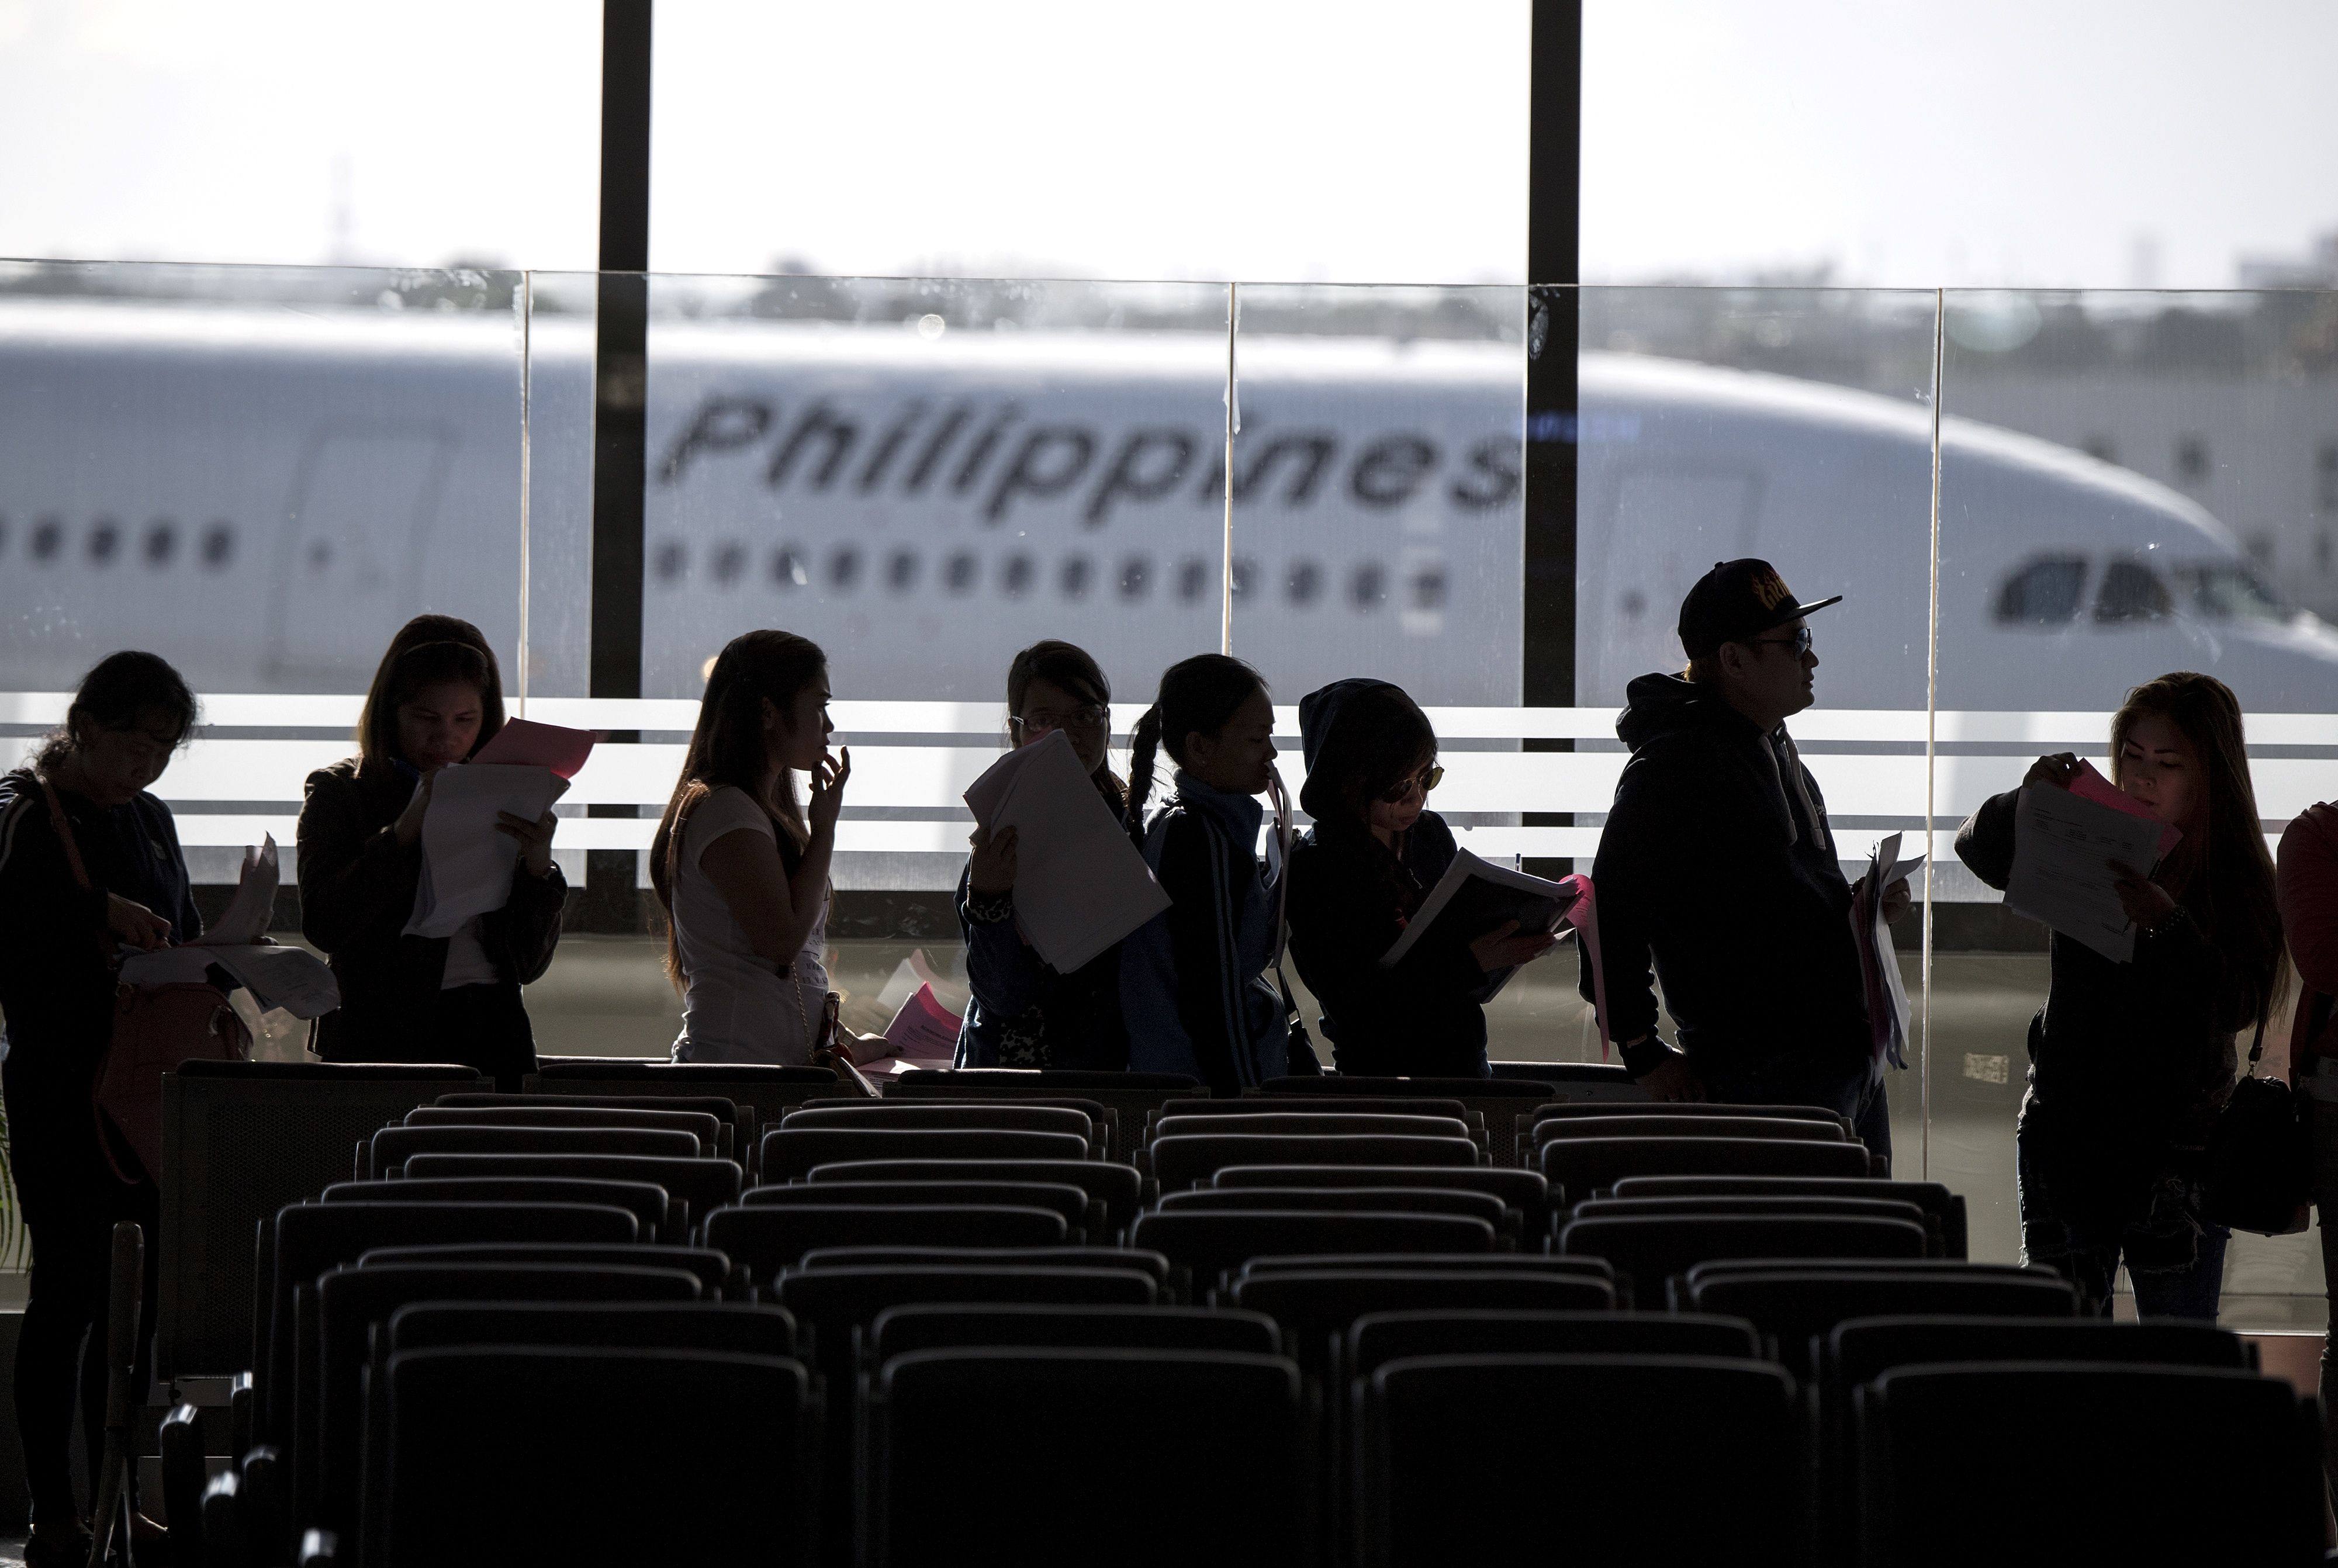 Filipino workers returning home from Kuwait arrive at Manila International Airport. More than 250,000 Filipinos work in Kuwait, mostly as helpers. File photo: AFP